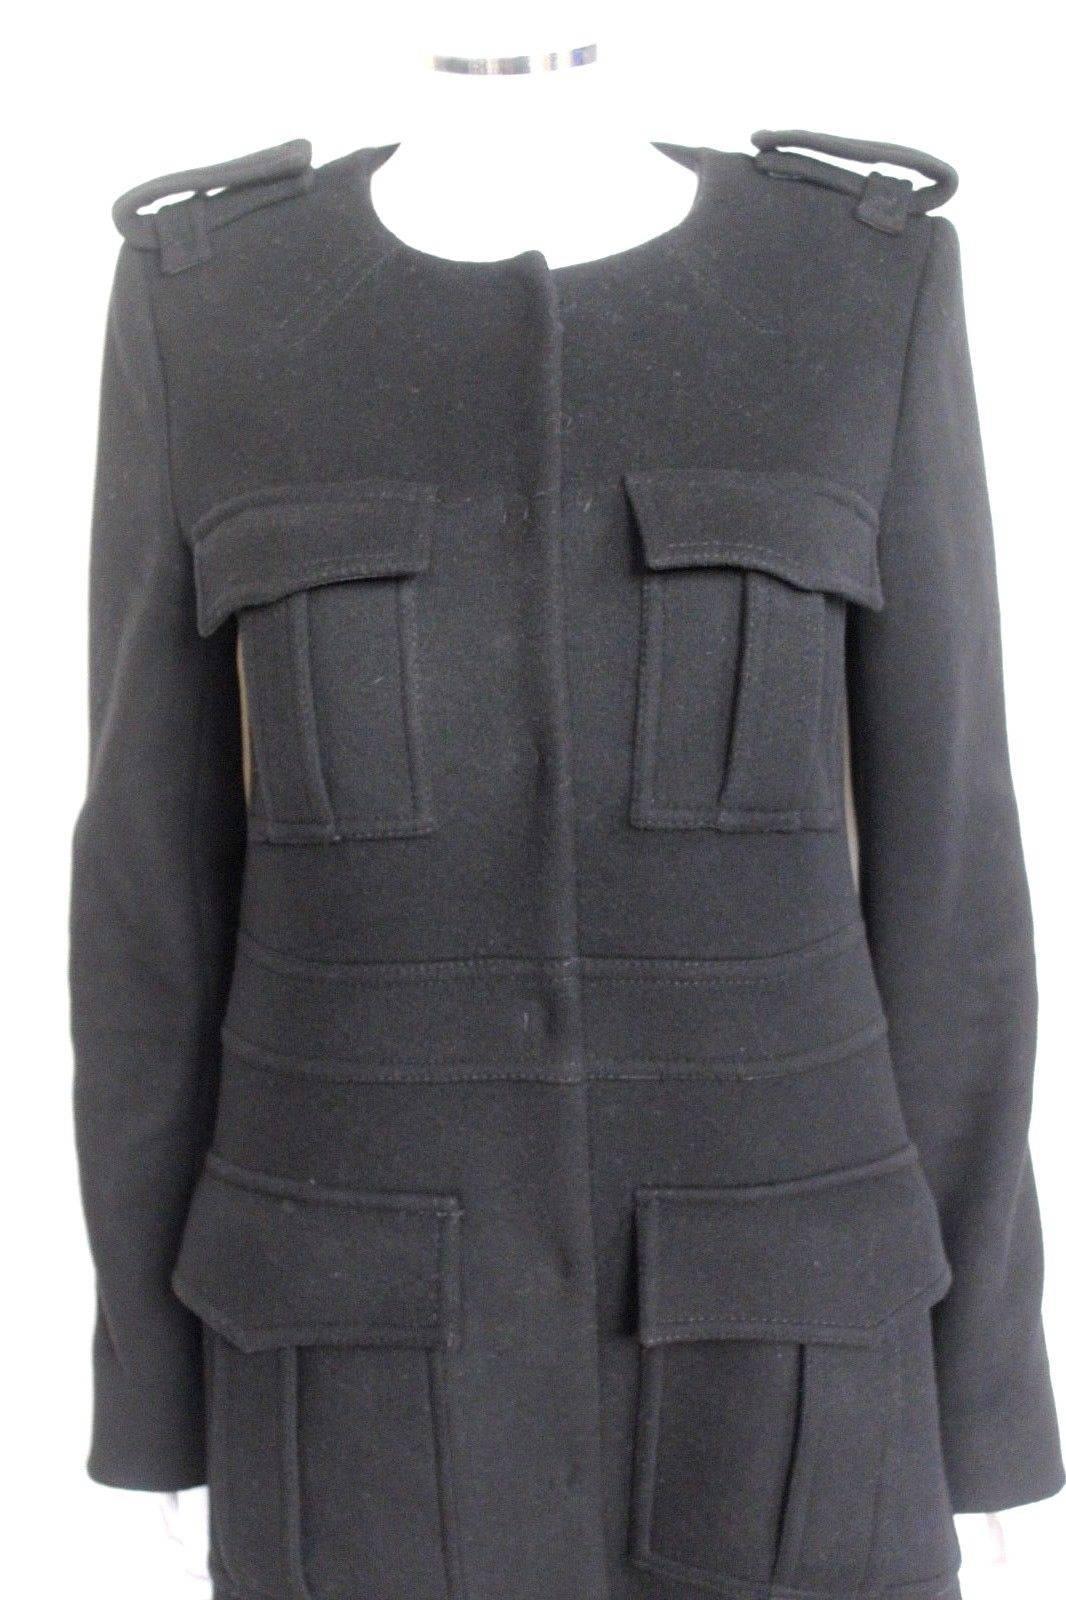 Chloe Black Epaulet Military Midi Coat F42  UK 12-14
Collarless with four pockets to the front 
Midi length 
Length 44 inches, chest 19 inches across, waist 18 inches across, hips 22 inches across laid flat 
Size UK14 however would best suit a size